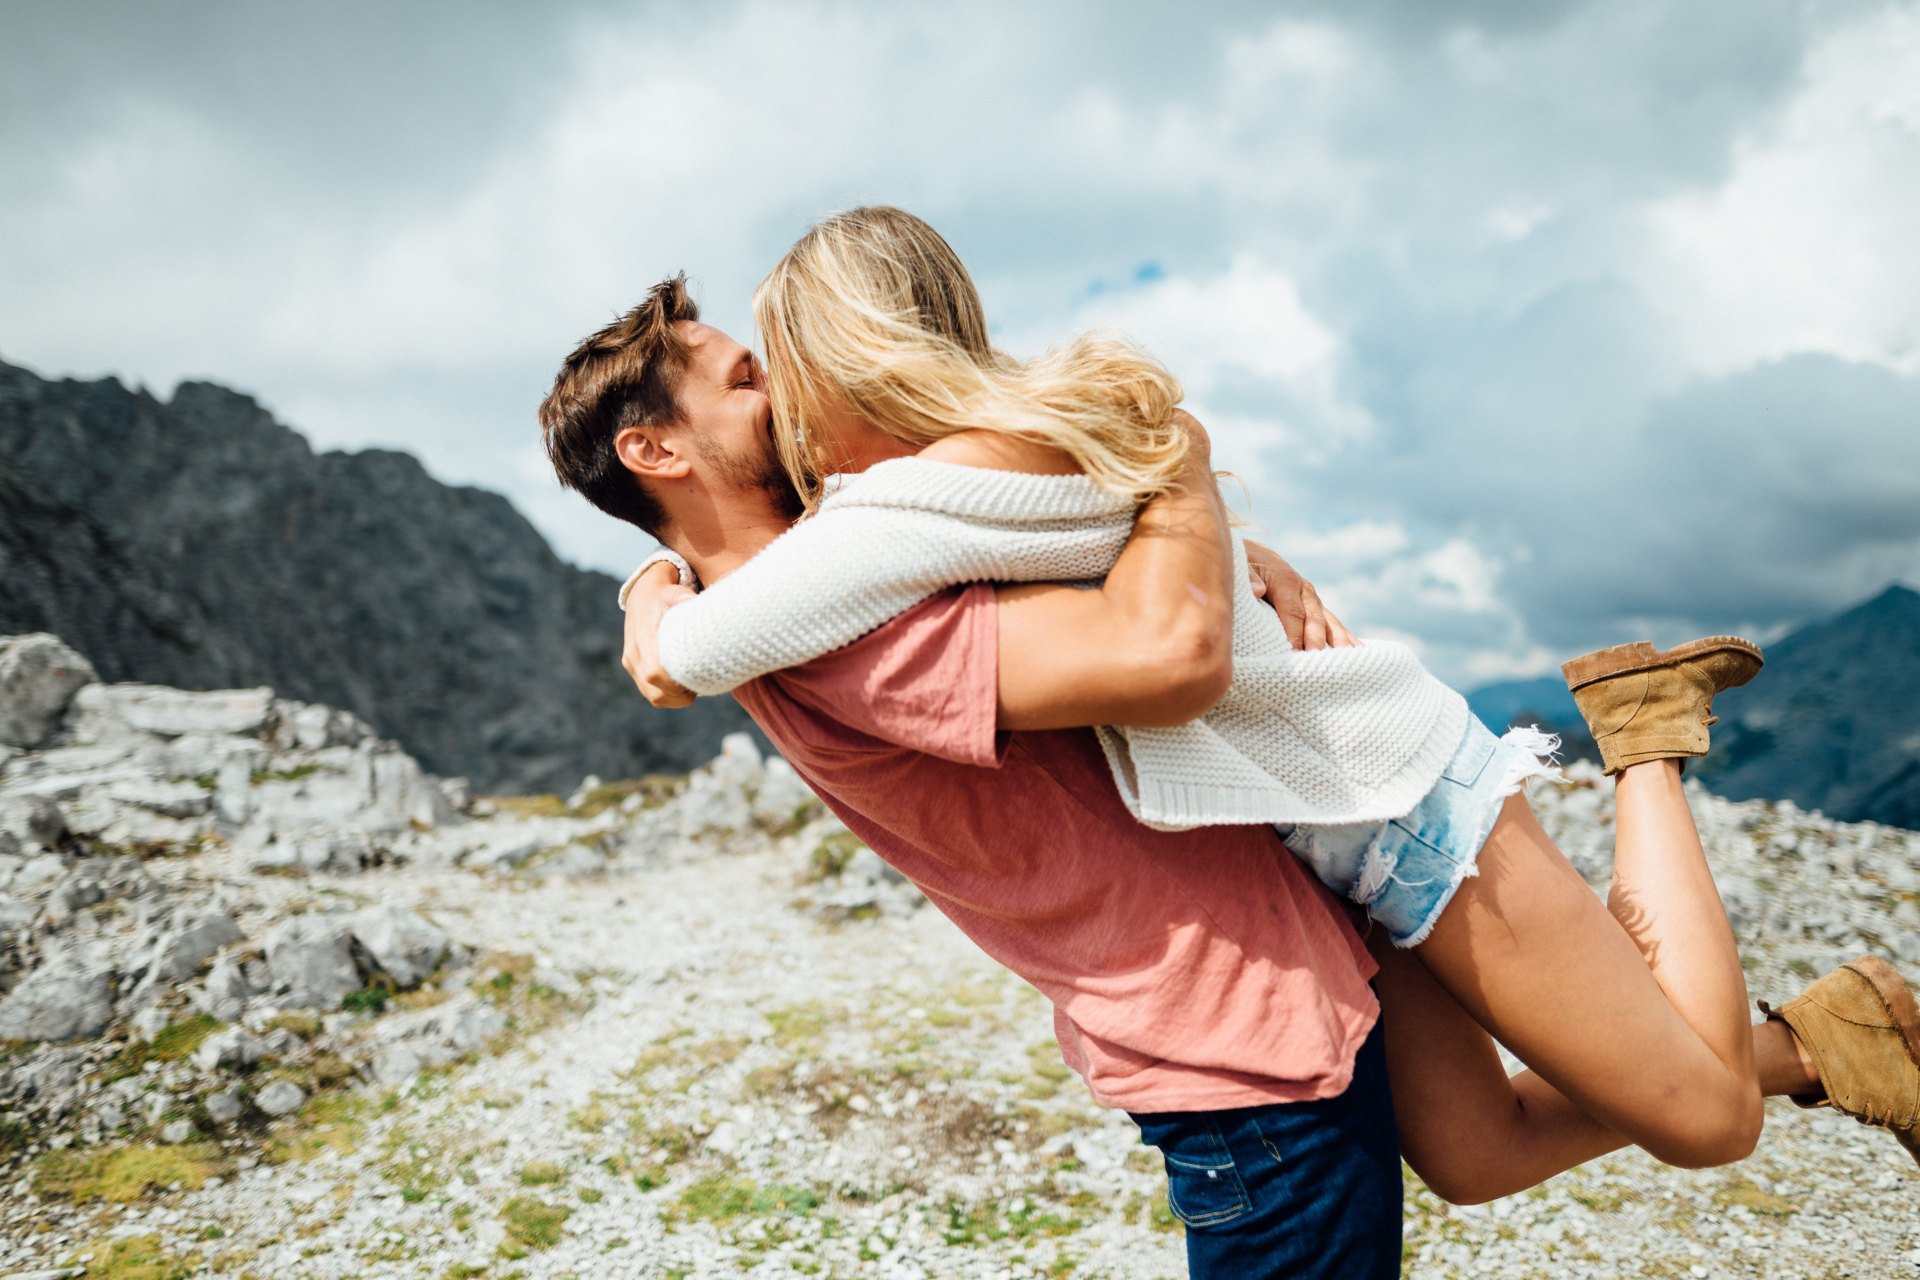 Here Is The Top 'Love Language' For Each Myers-Briggs Personality Type